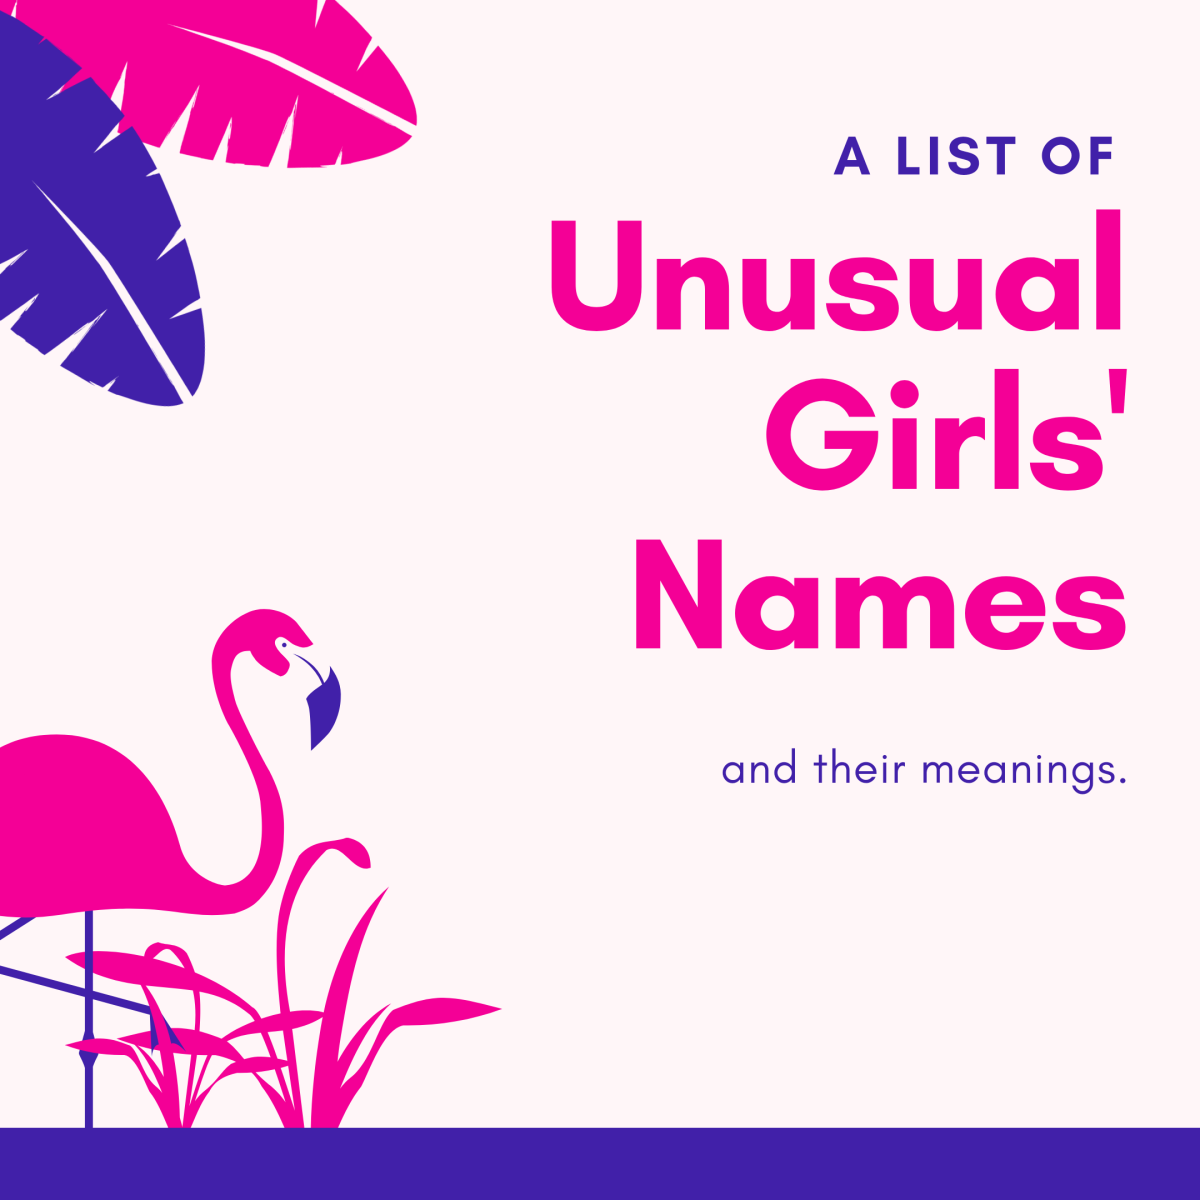 A List of Unusual Girls Names and Meanings - HubPages